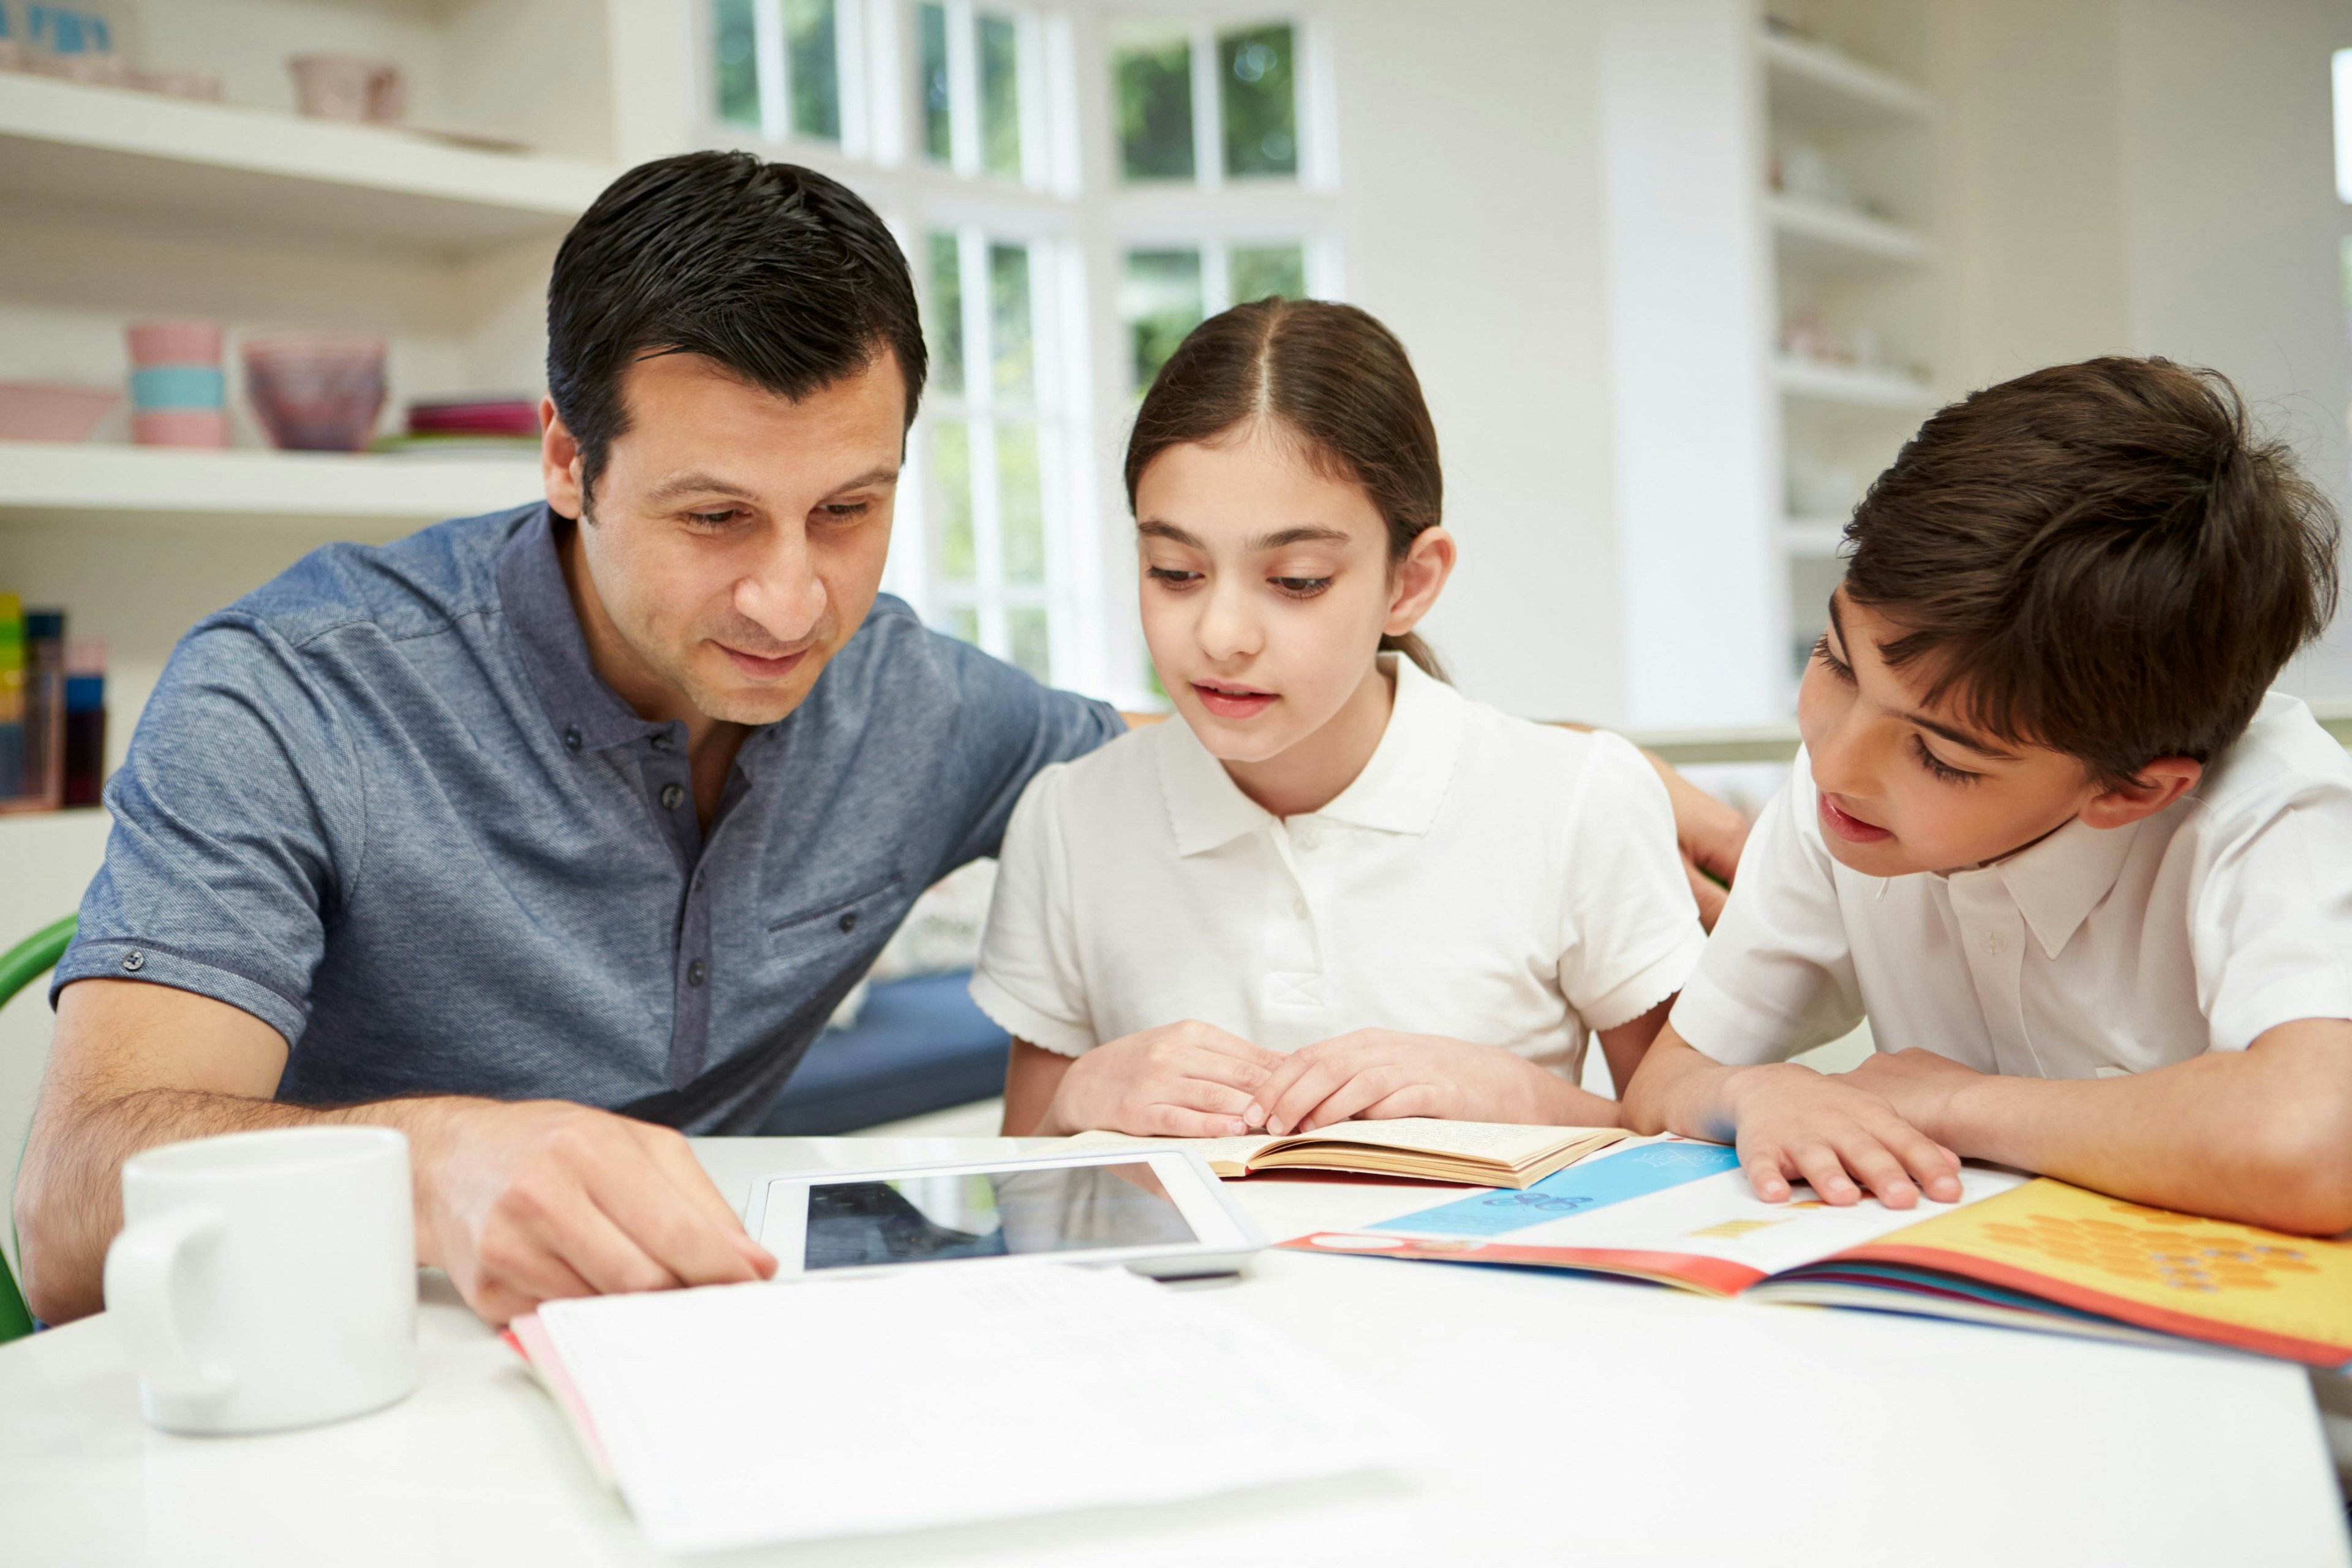 A man and two children look at books and a tablet on the table.